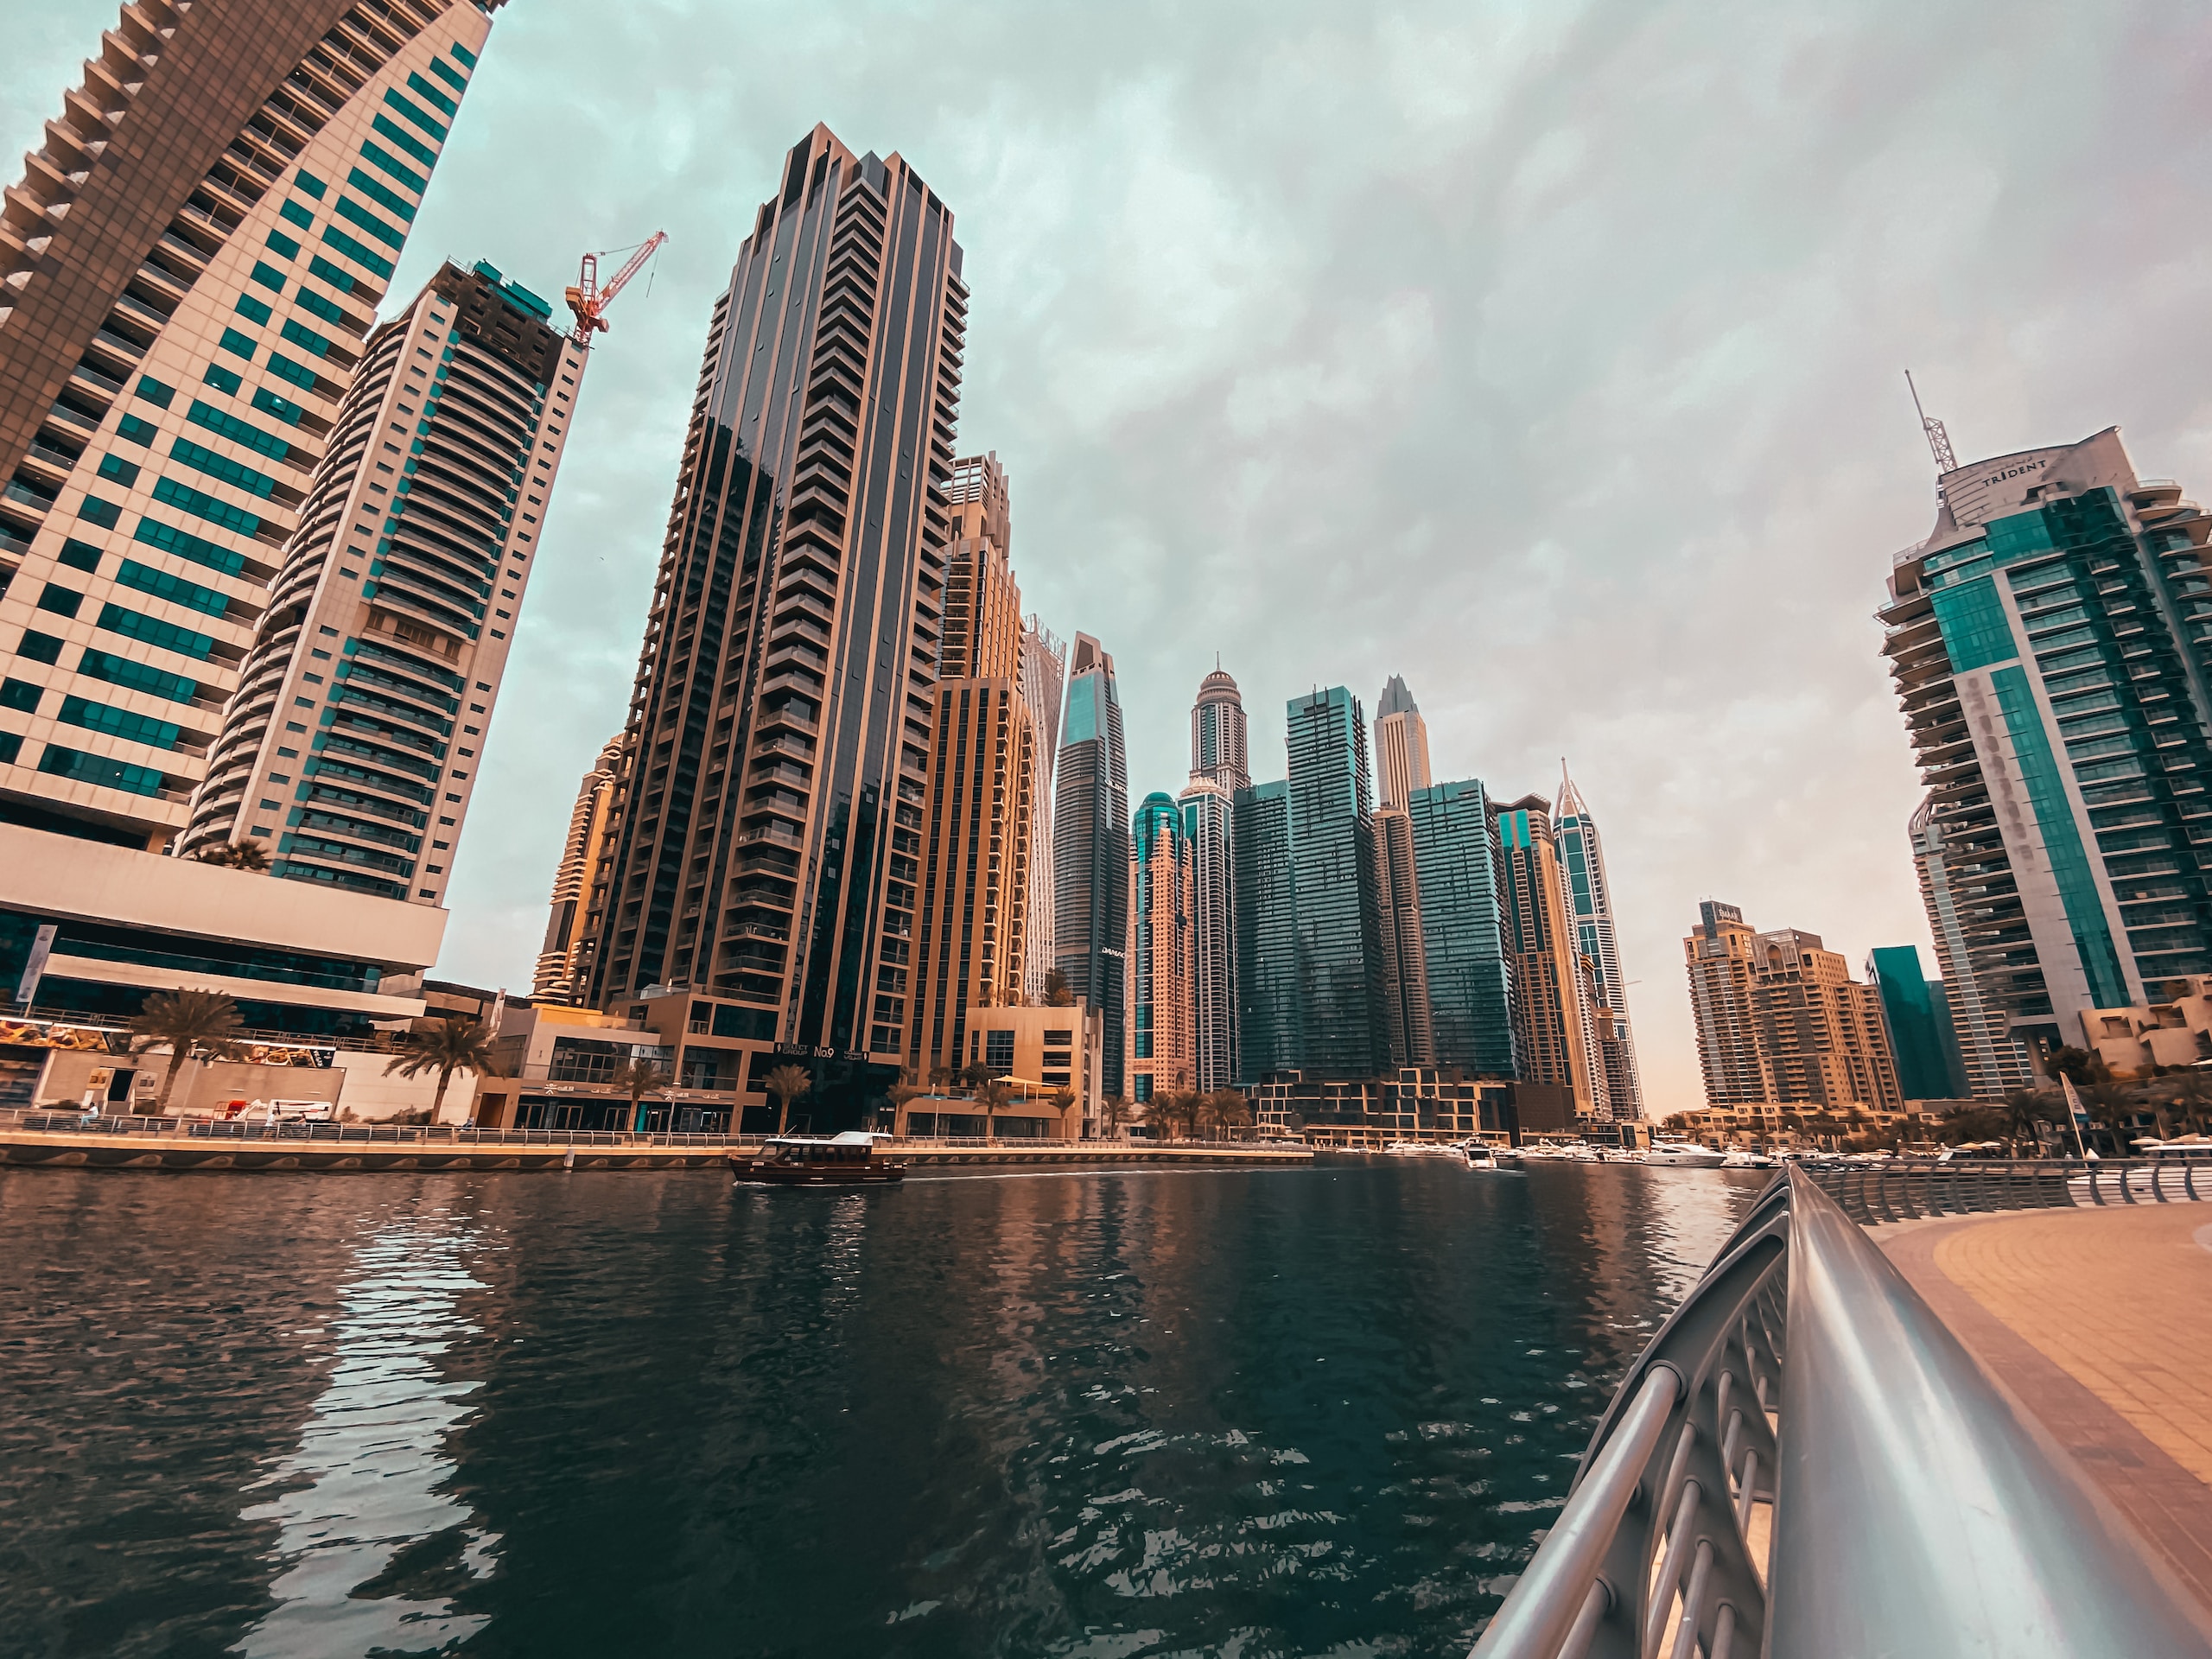 How can I start a small business in UAE?